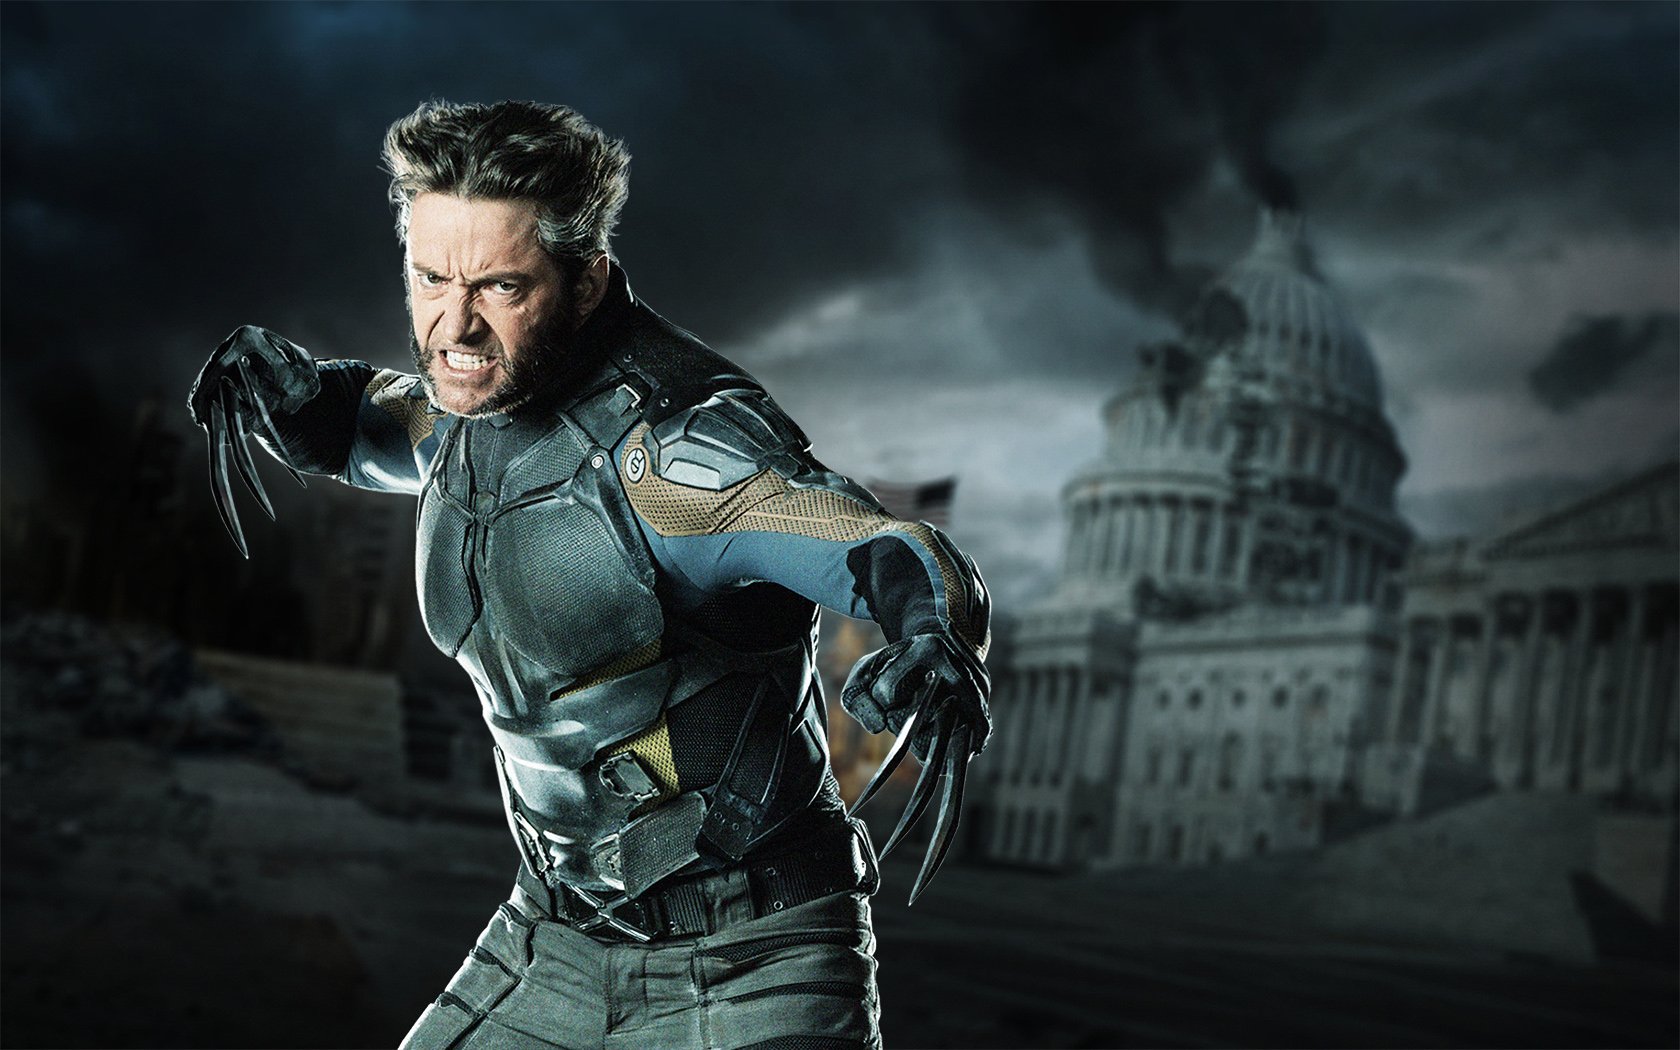 Wolverine And The X-Men Wallpapers